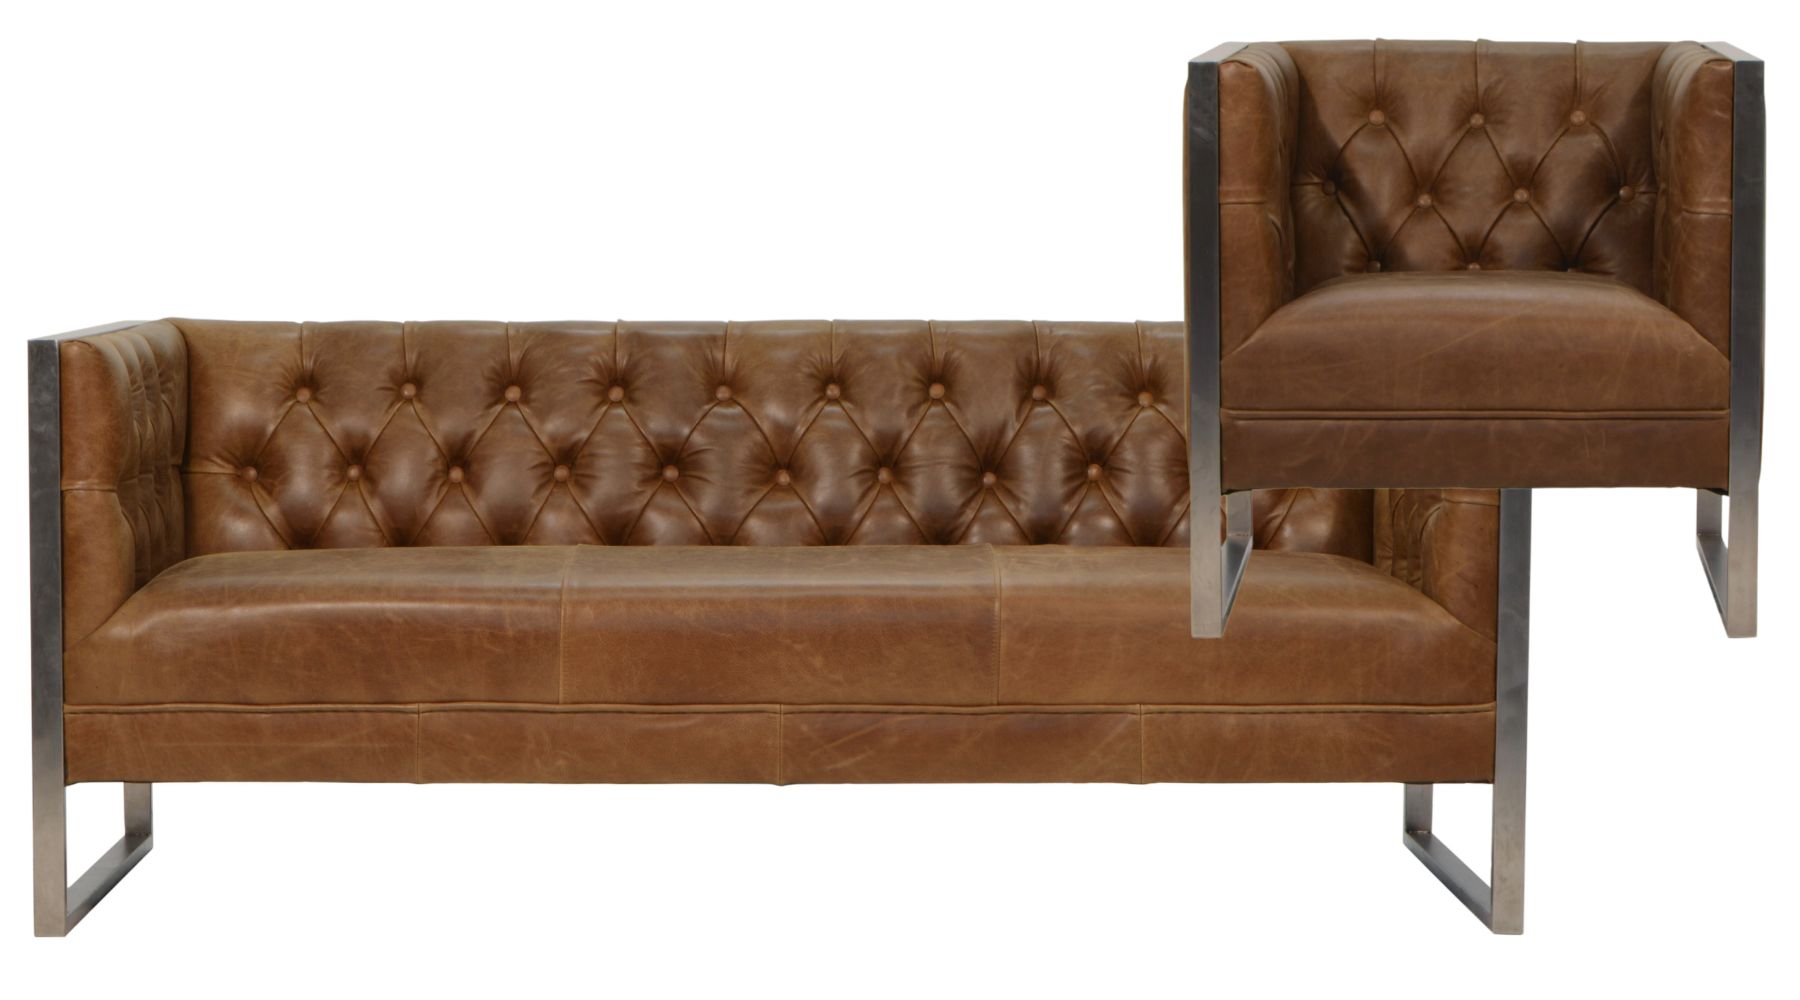 brown leather sofa and leather armchair